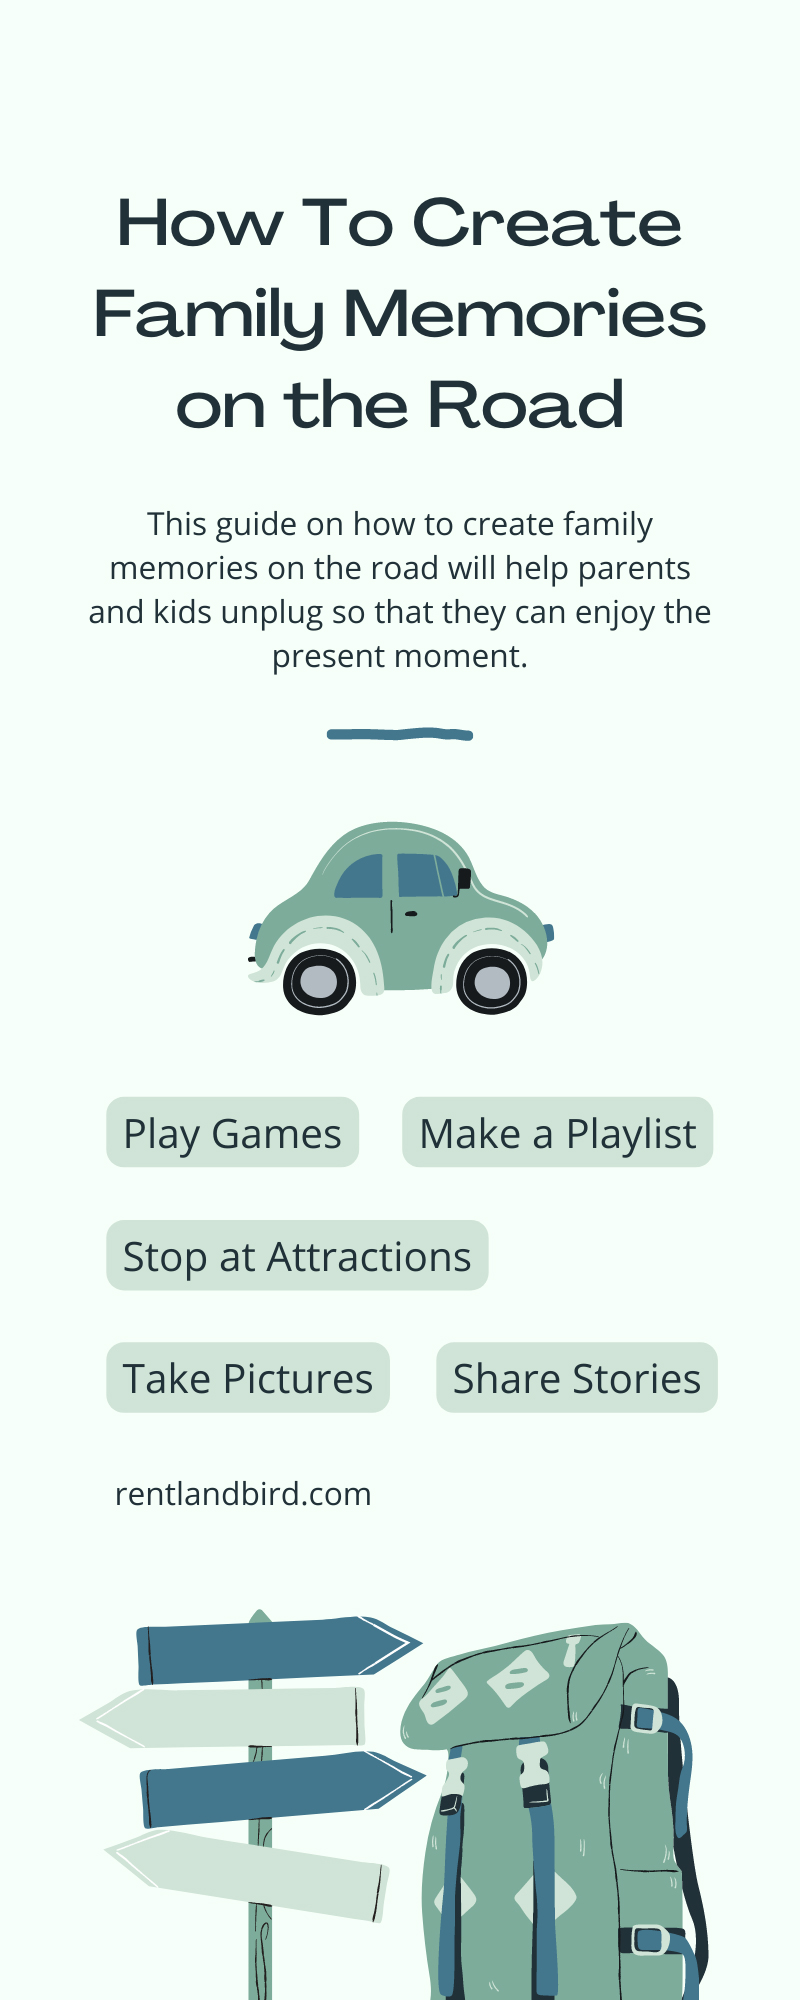 How To Create Family Memories on the Road